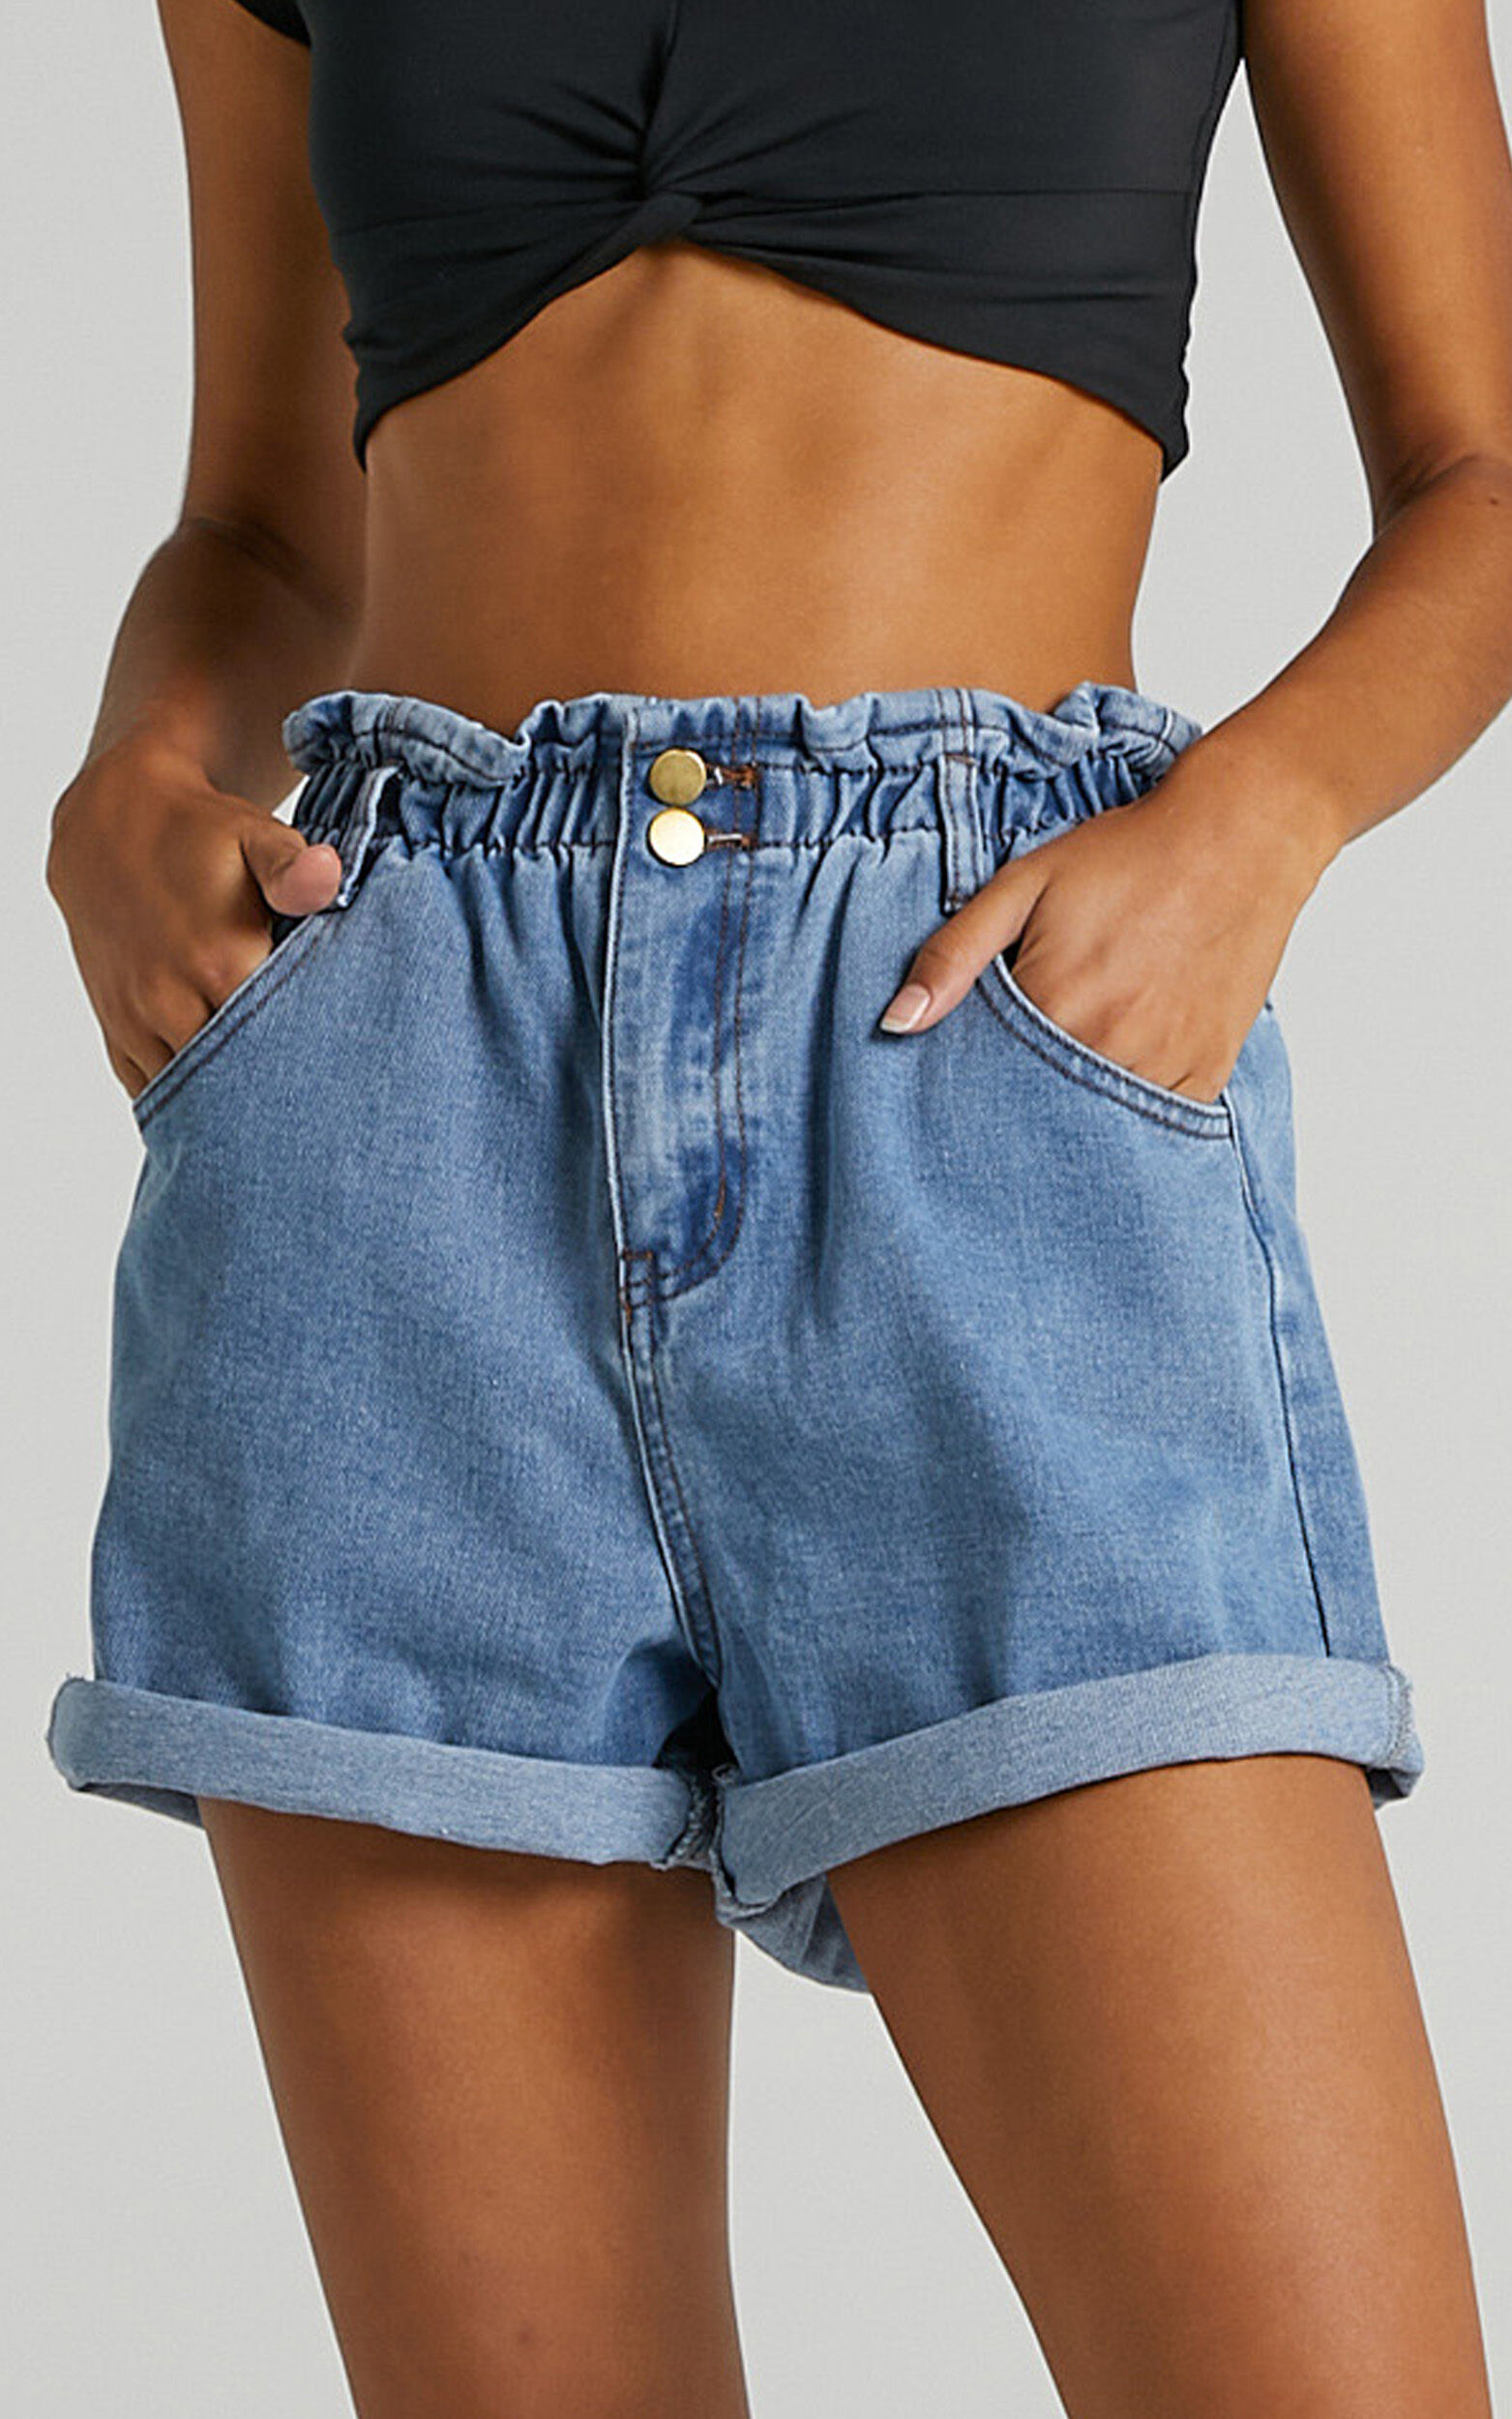 Stomping Ground denim shorts in light wash - 6 (XS), Blue, super-hi-res image number null